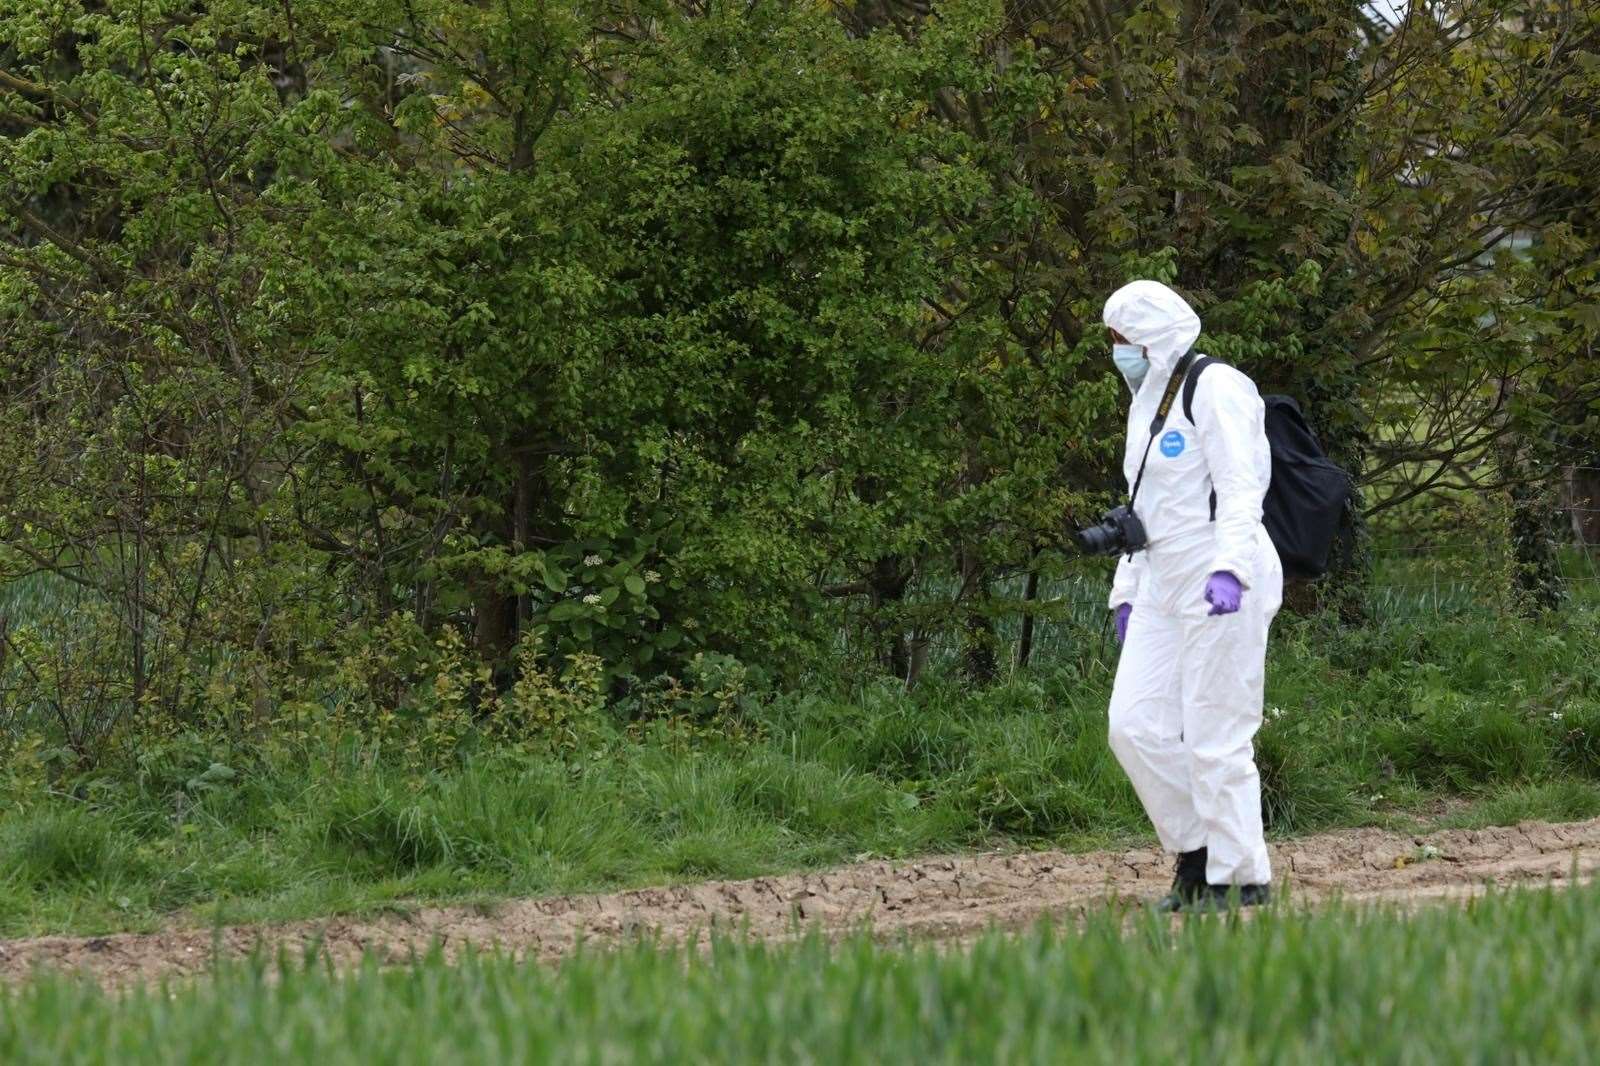 Police are searching a field in Womenswold as their hunt for PCSO Julia James' killer continues. Picture: UKNIP